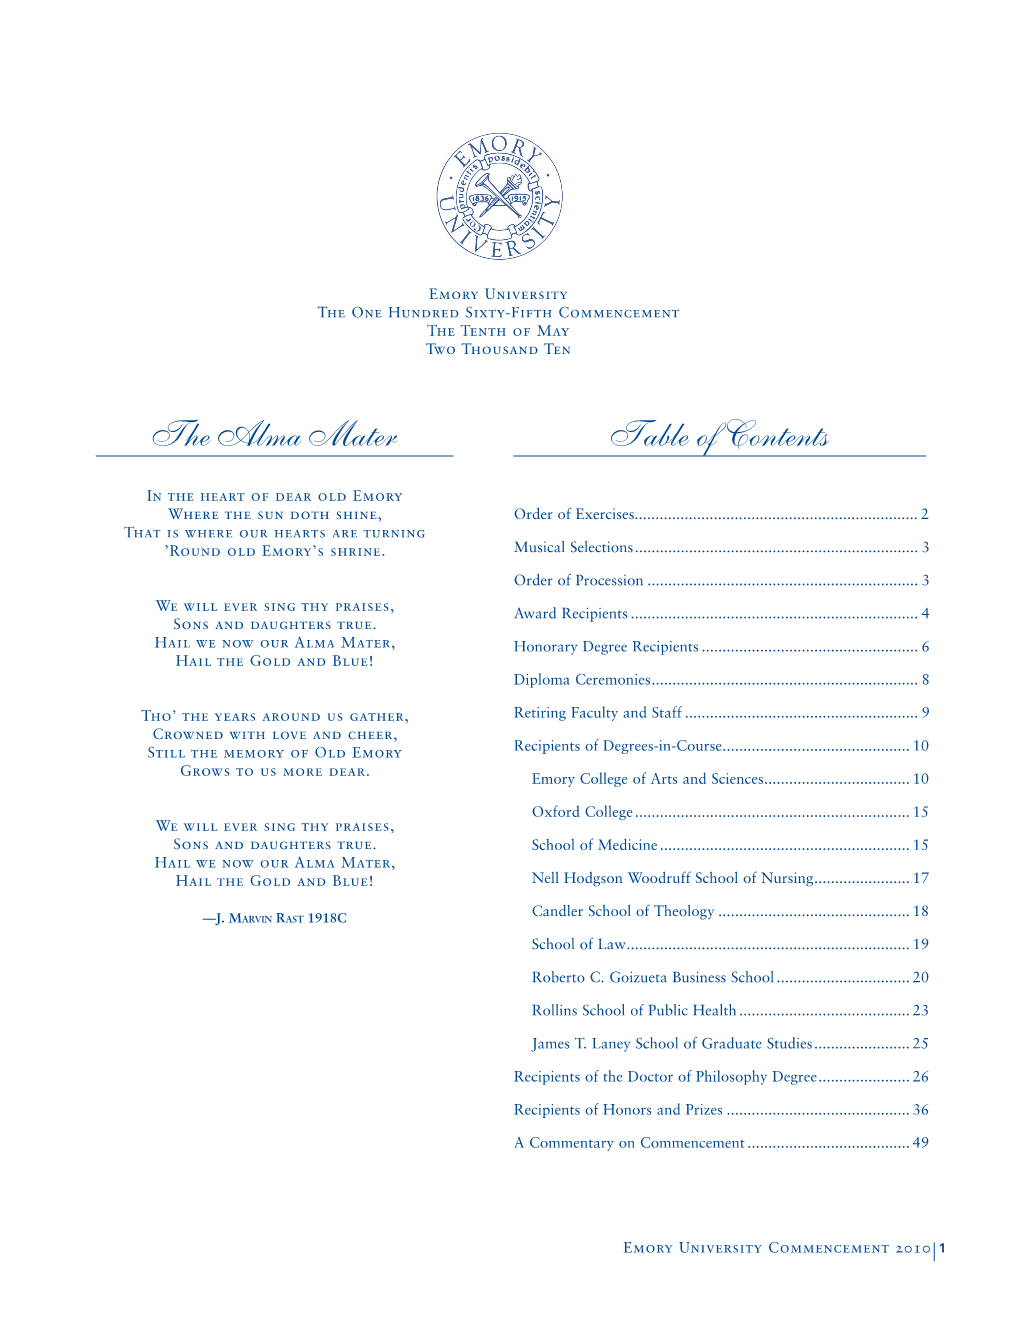 Table of Contents the Alma Mater